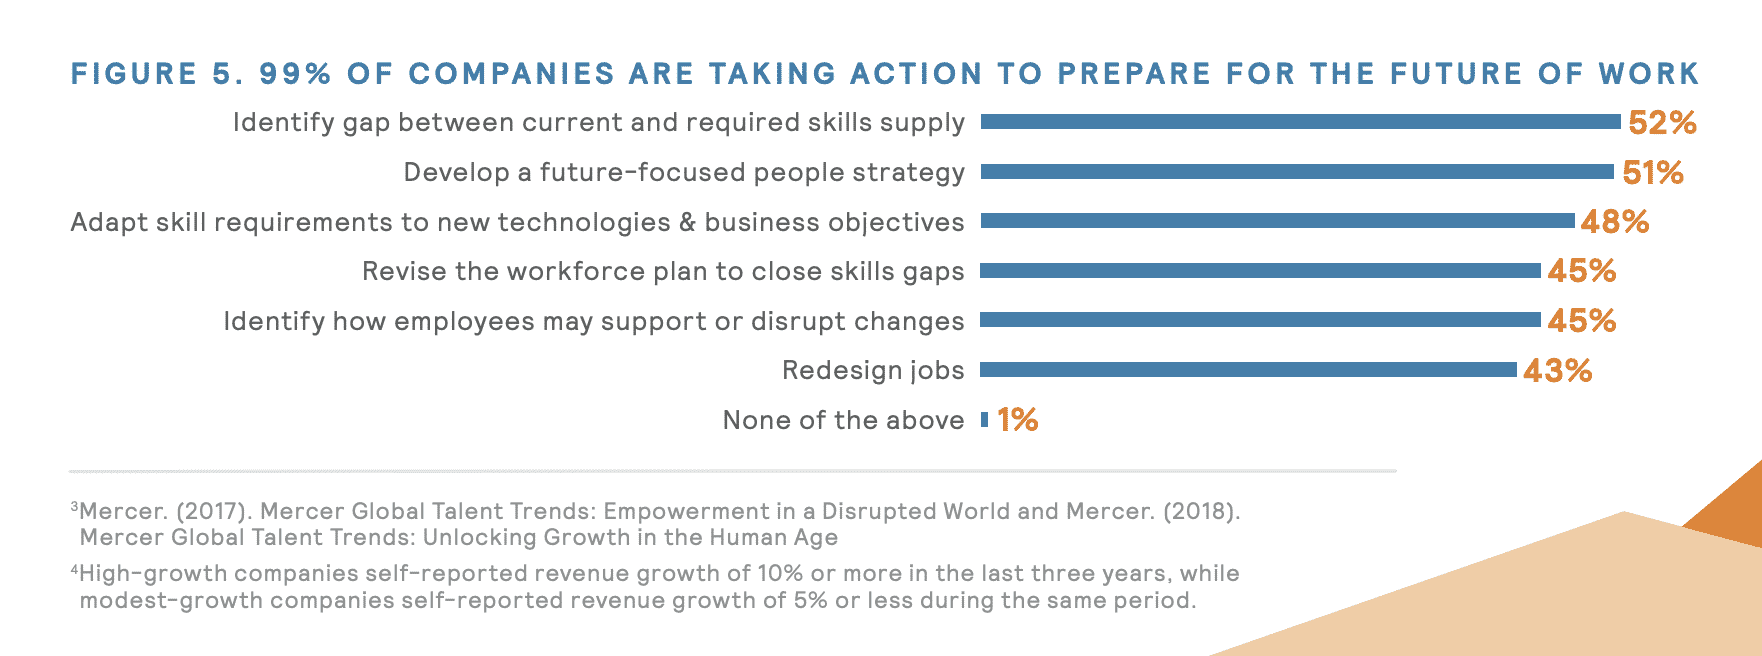 A chart showing how companies are taking action to prepare for the future of work